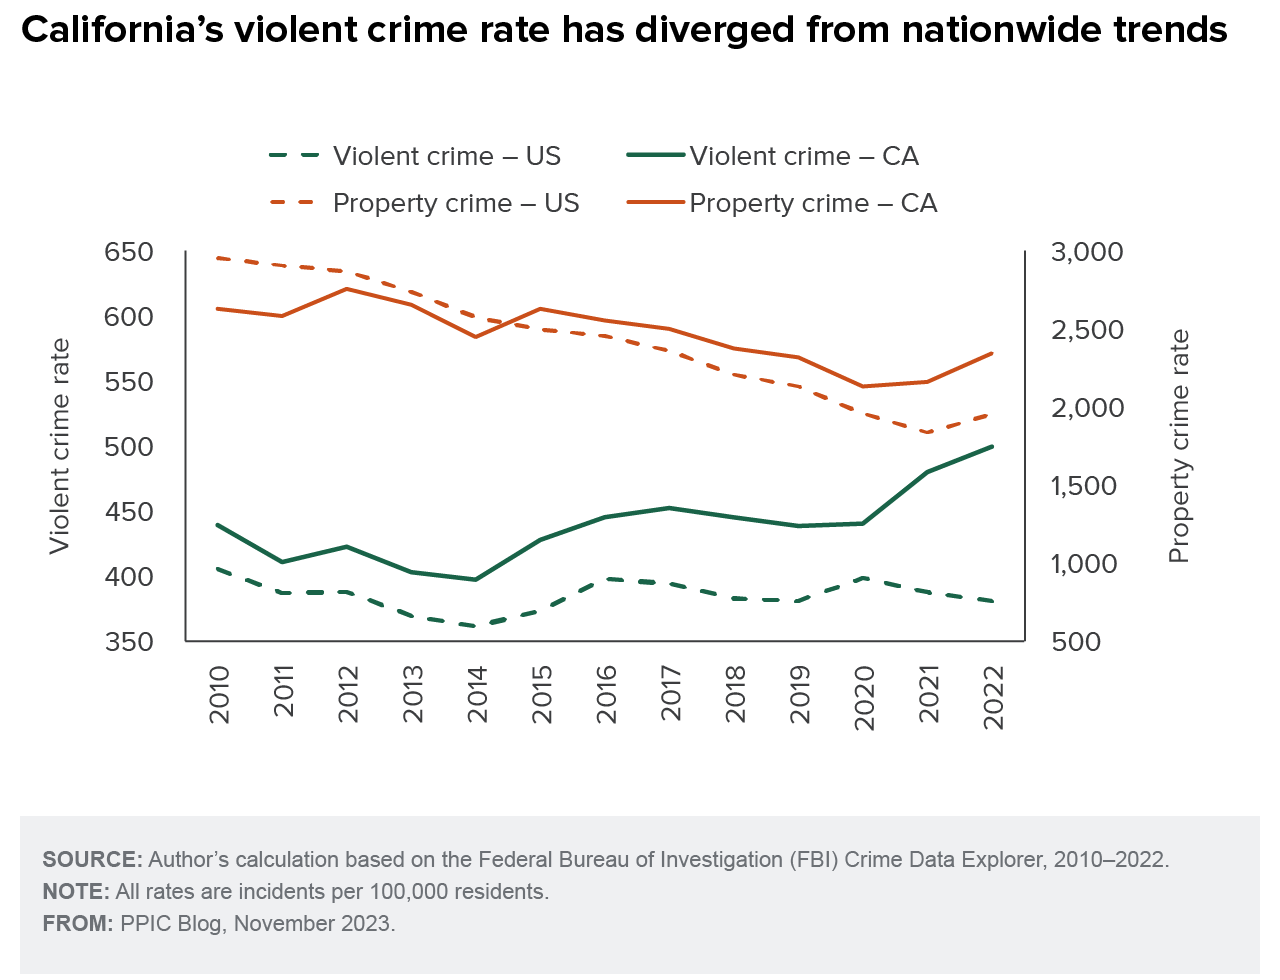 figure - California’s violent crime rate has diverged from nationwide trends